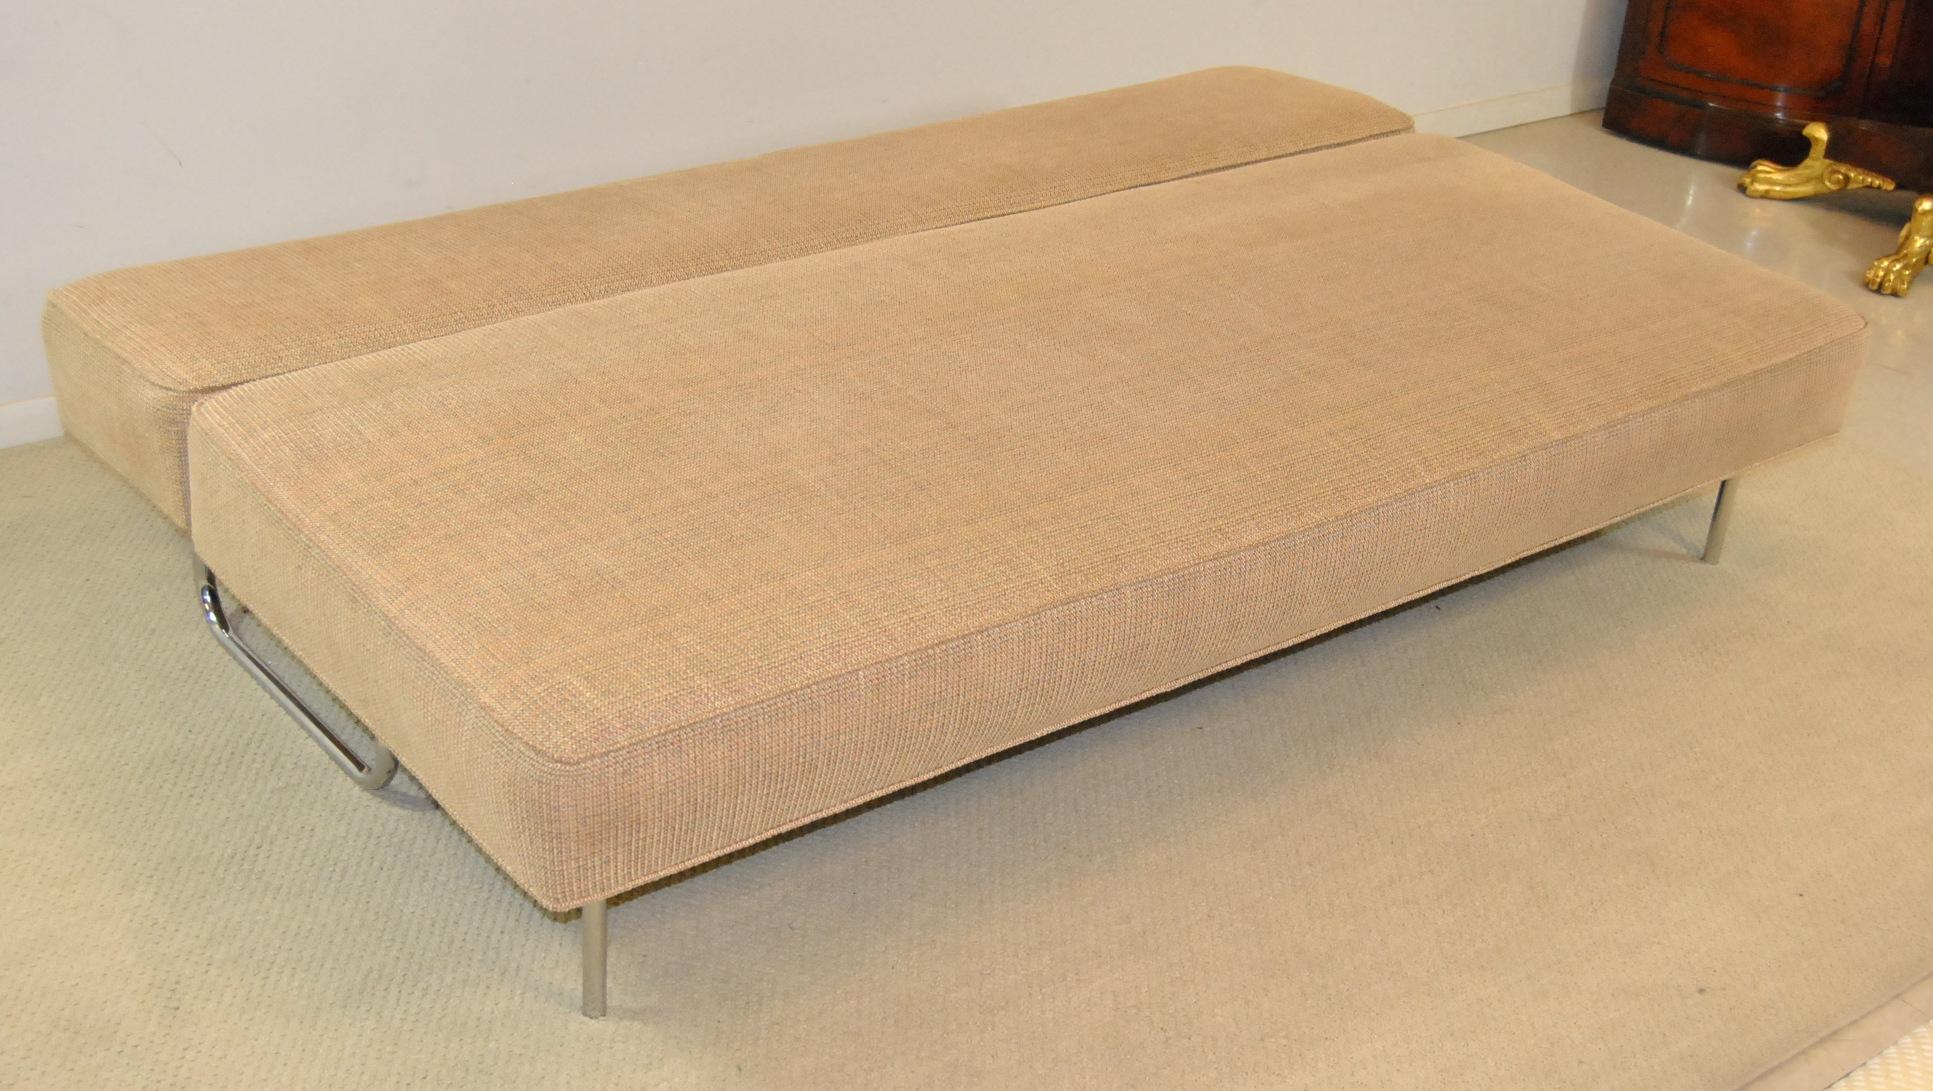 Mid-Century Modern sofa / bed by Ernst Ambuhler EA-616. Camel fabric with woven multicolored texture. Tubular frame forms sofa or folds down into a bed. Sofa is 76